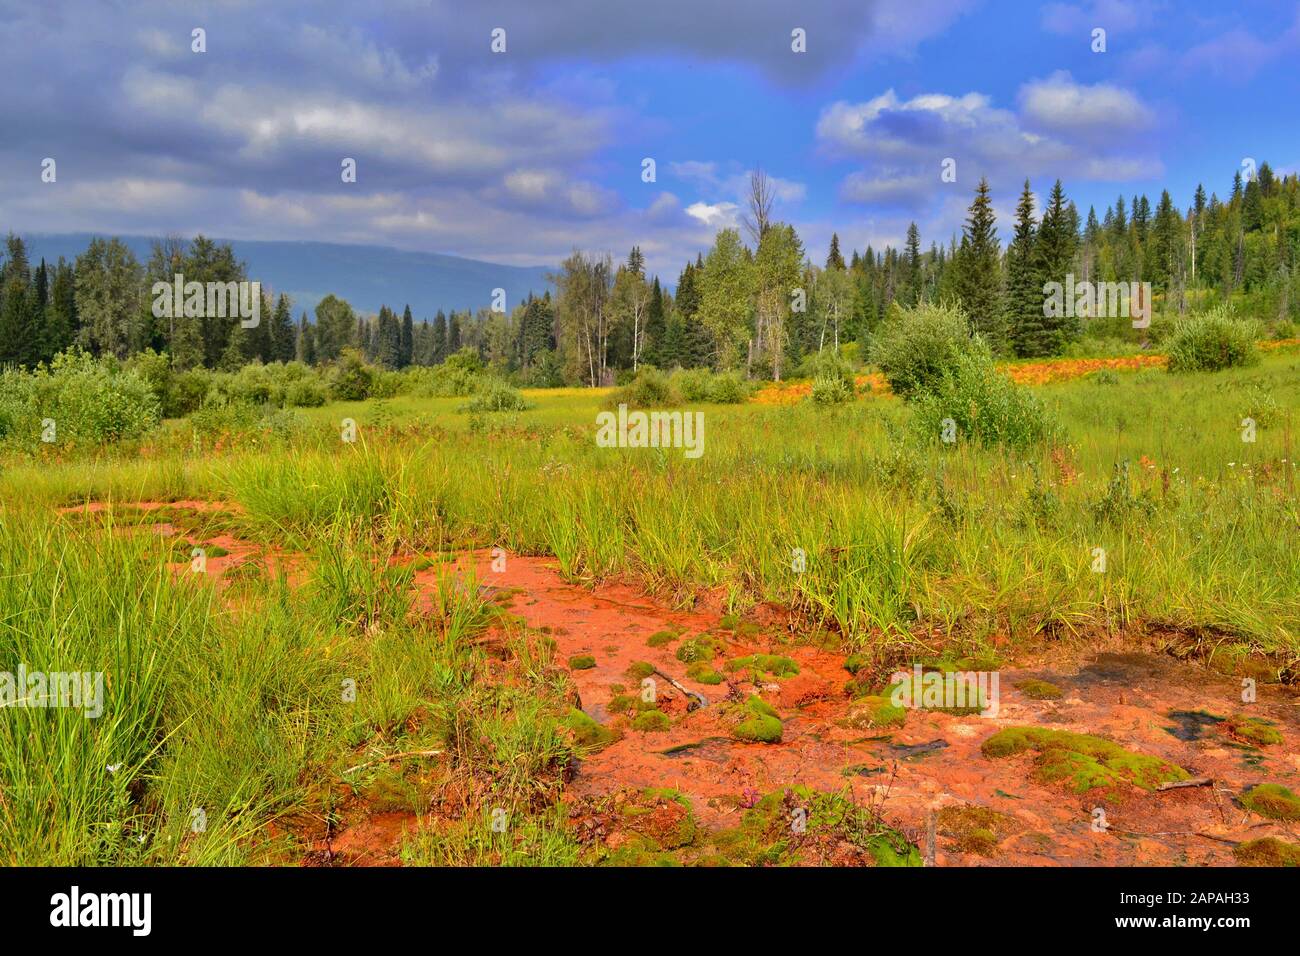 Mineral springs in Kootenay National Park, Canada. Beautiful colorful green and orange ground, blue sky with white clouds. Stock Photo